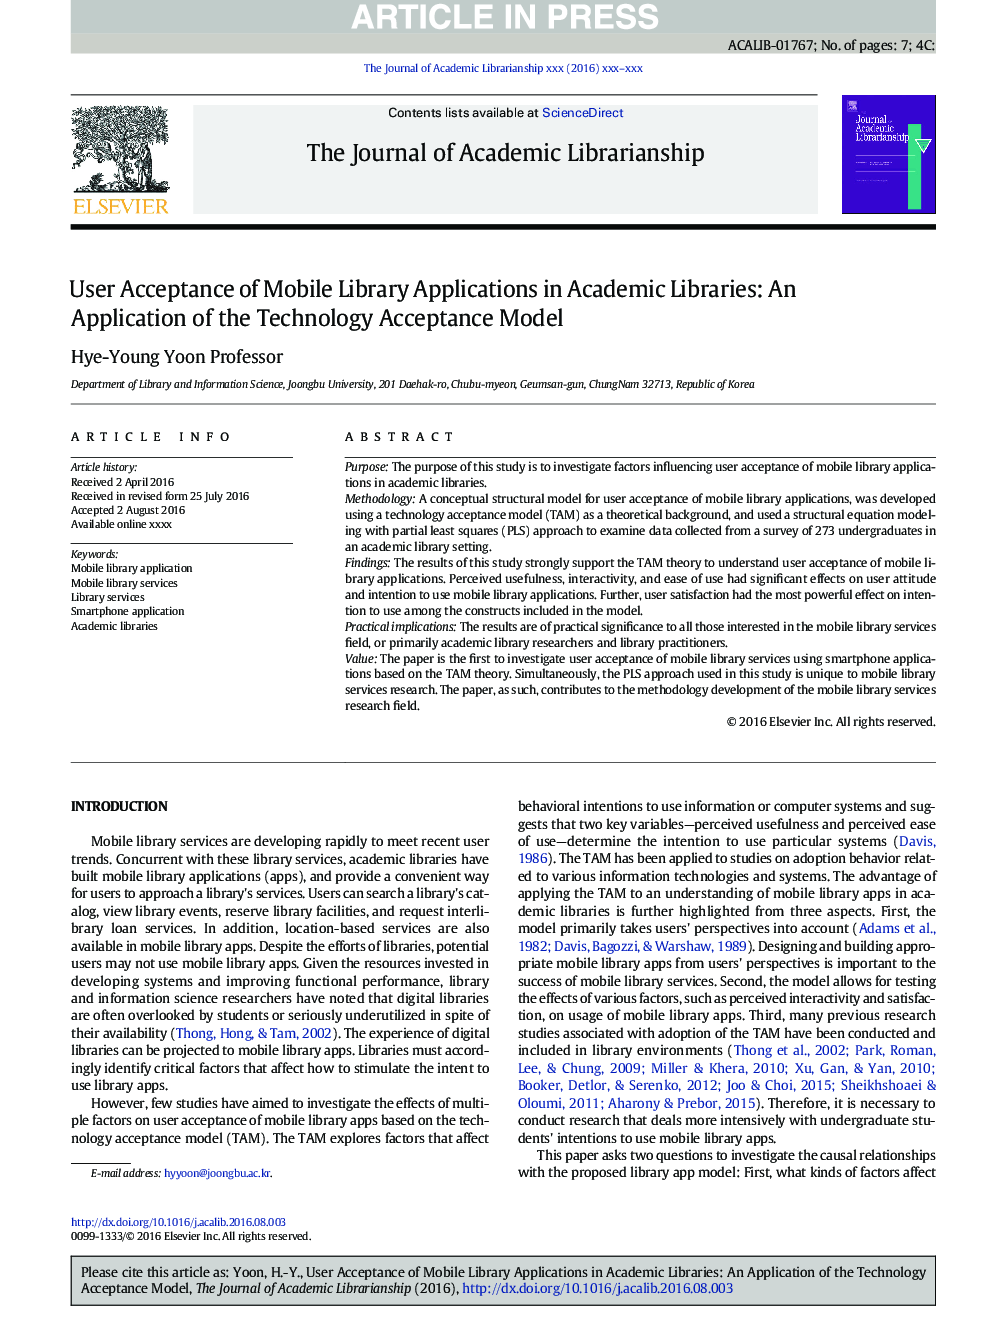 User Acceptance of Mobile Library Applications in Academic Libraries: An Application of the Technology Acceptance Model